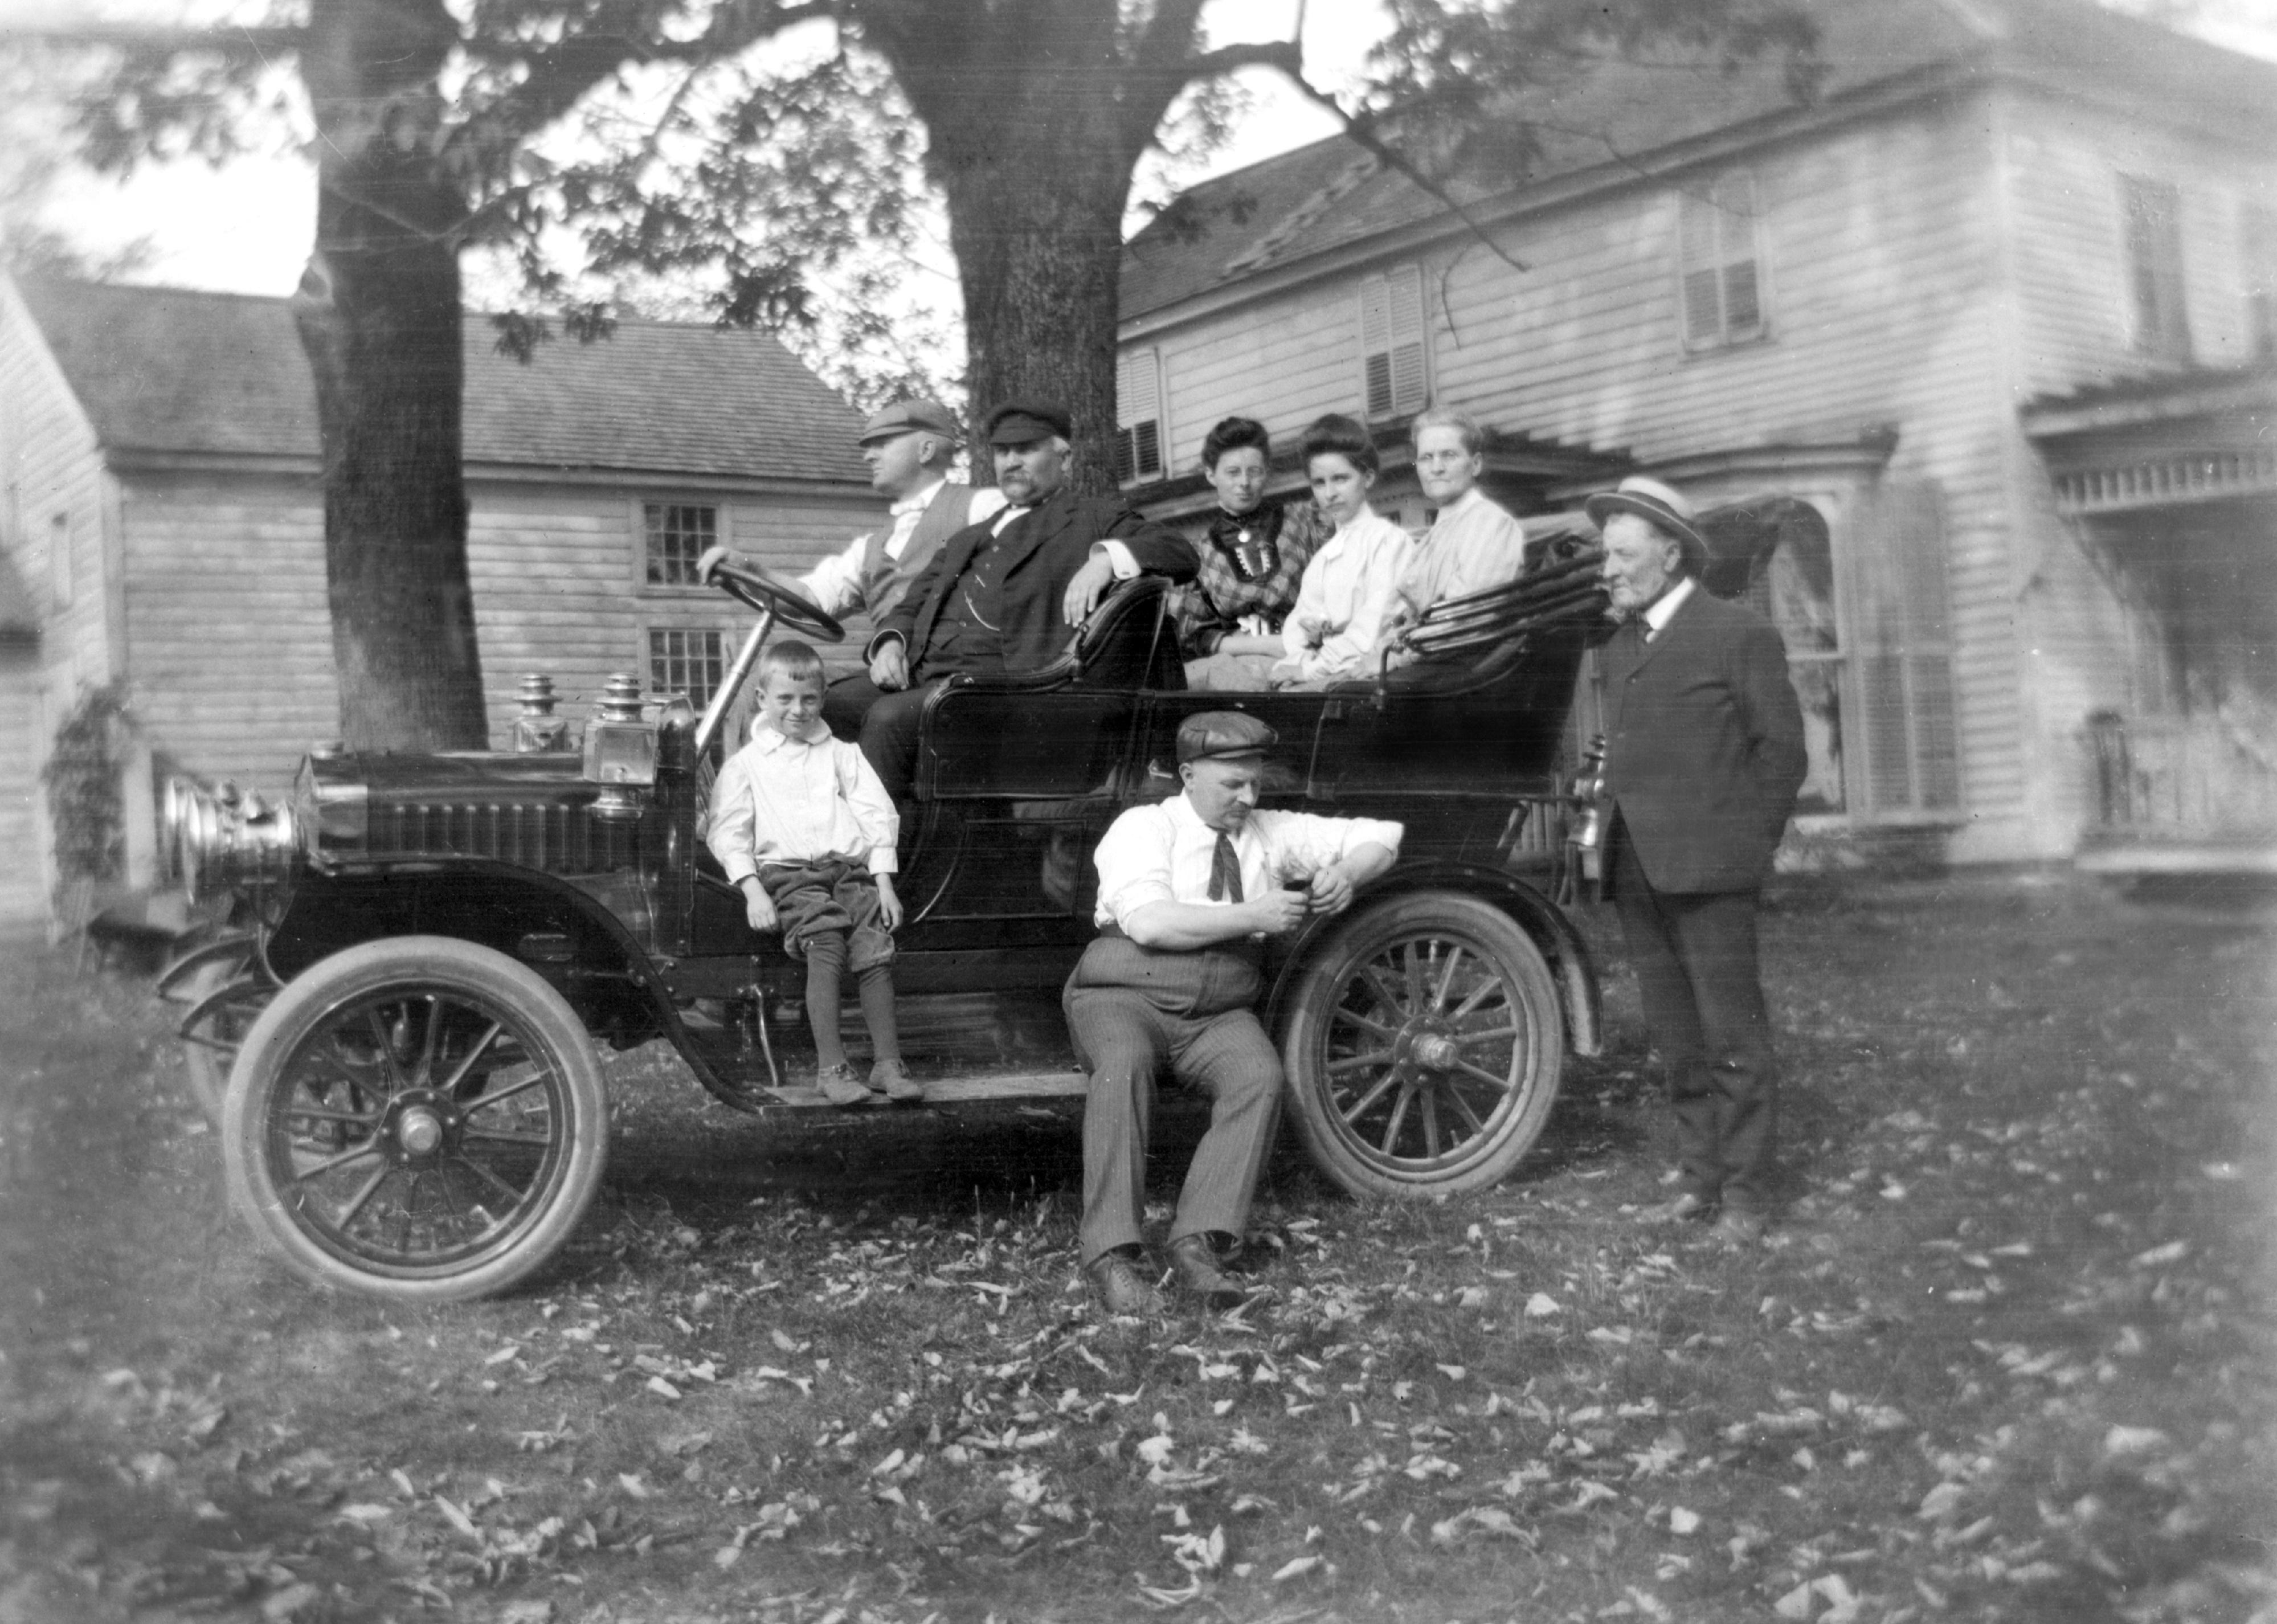 A family gets ready for a car ride in 1920.